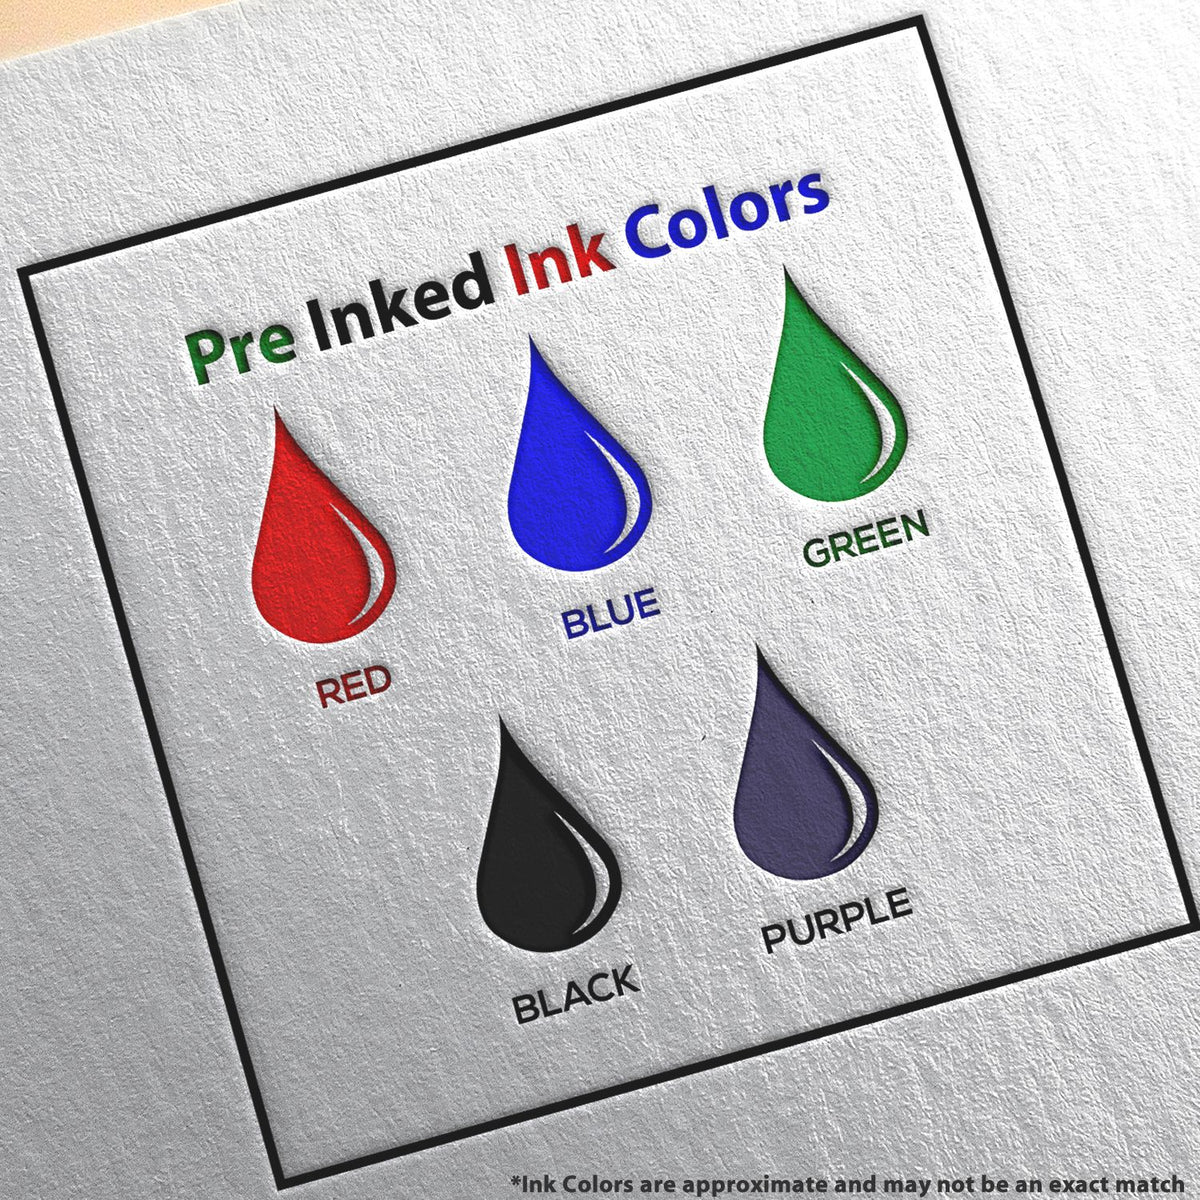 A picture showing the different ink colors or hues available for the Premium MaxLight Pre-Inked Colorado Engineering Stamp product.